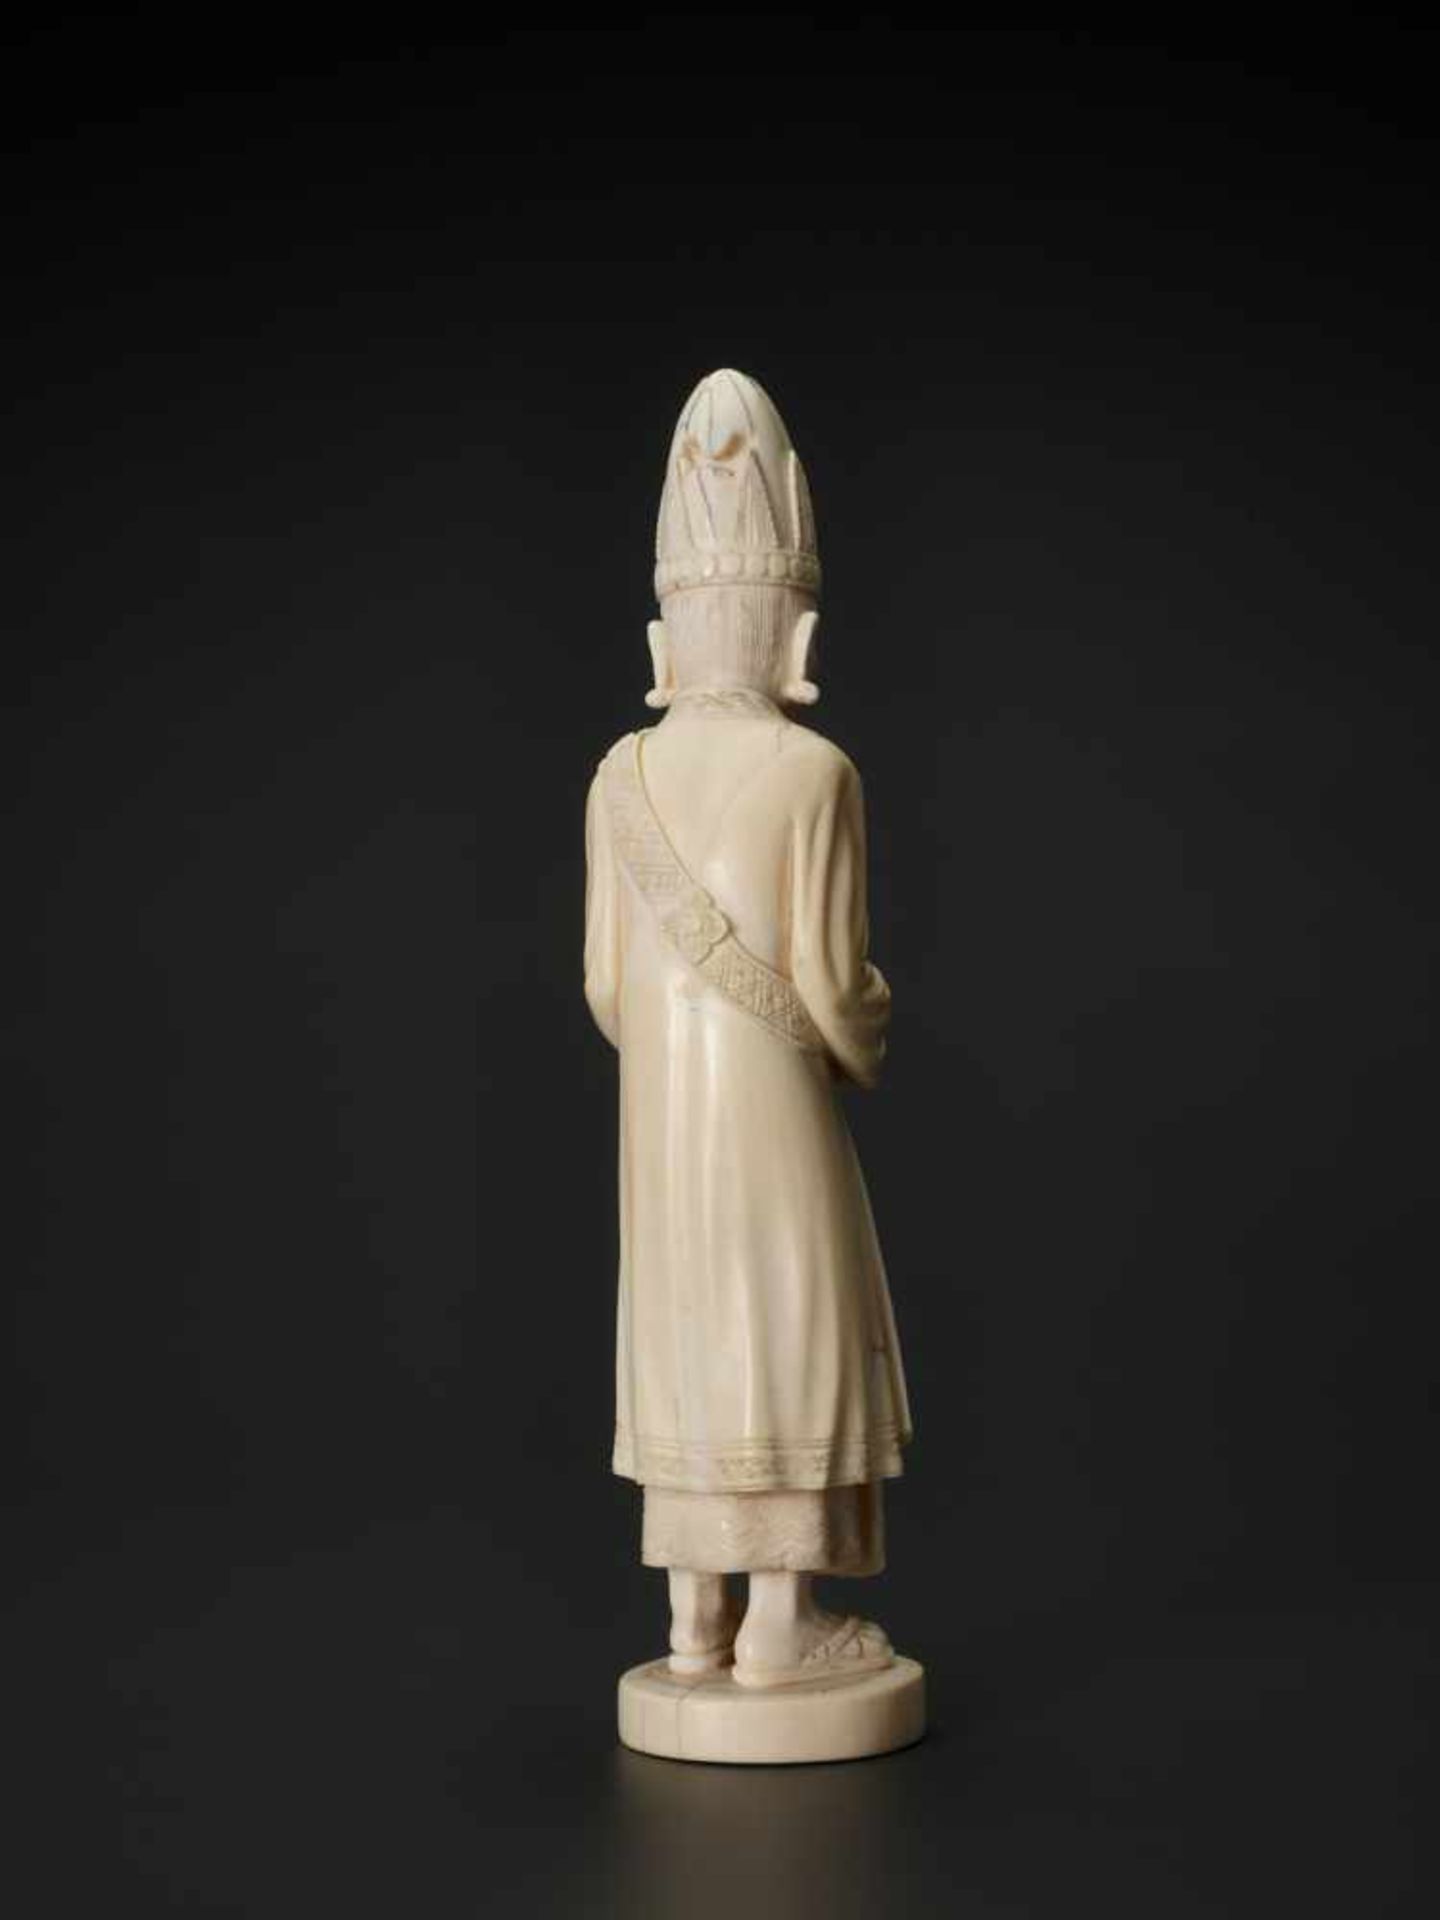 A 19TH CENTURY INDO-PERSIAN IVORY SCULPTURE OF A PRIEST Ivory India, 19th century This finely carved - Image 3 of 6